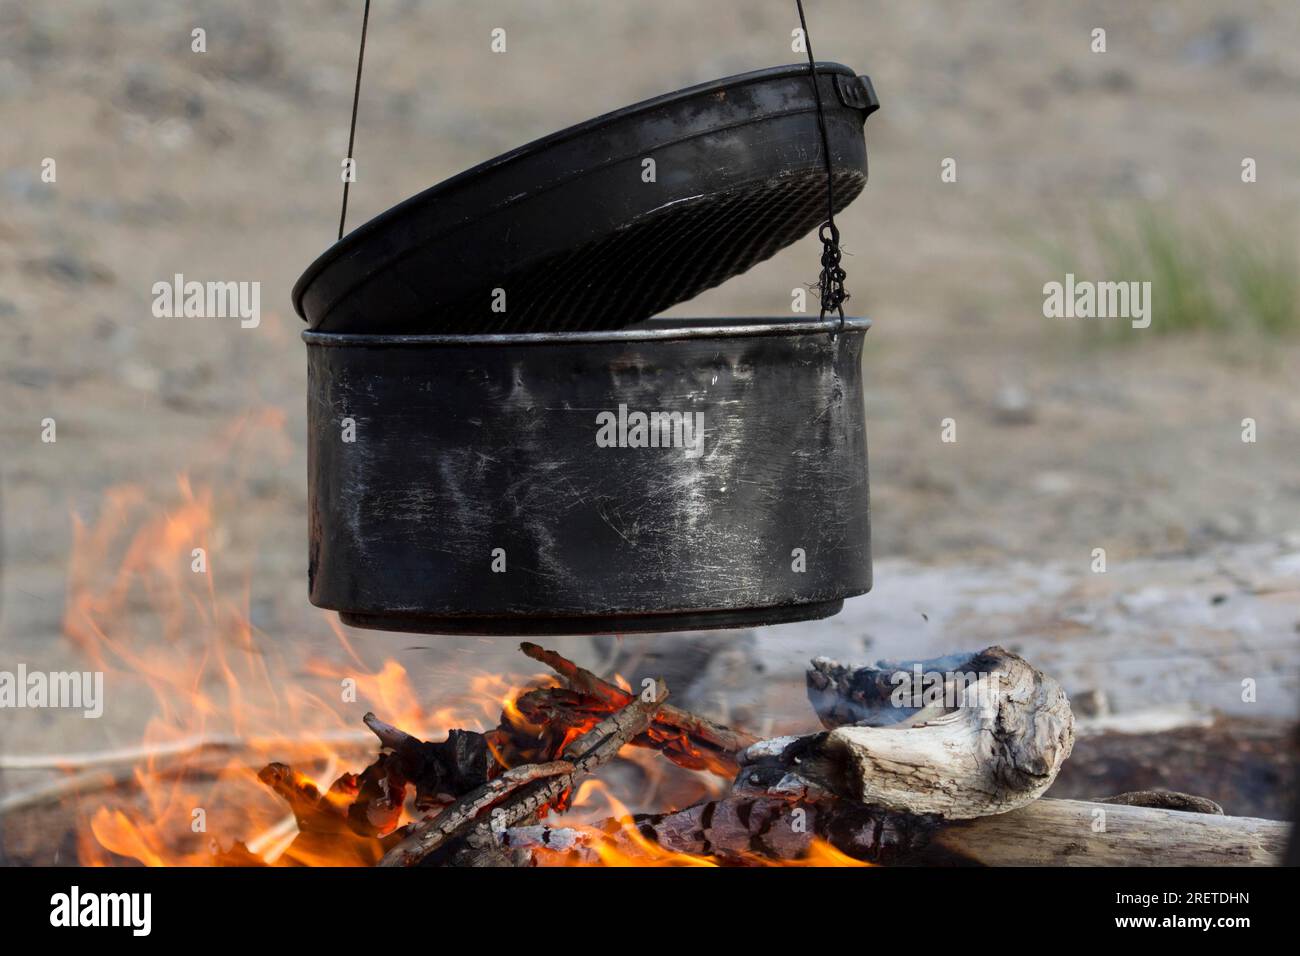 Cooking pot over the campfire Stock Photo